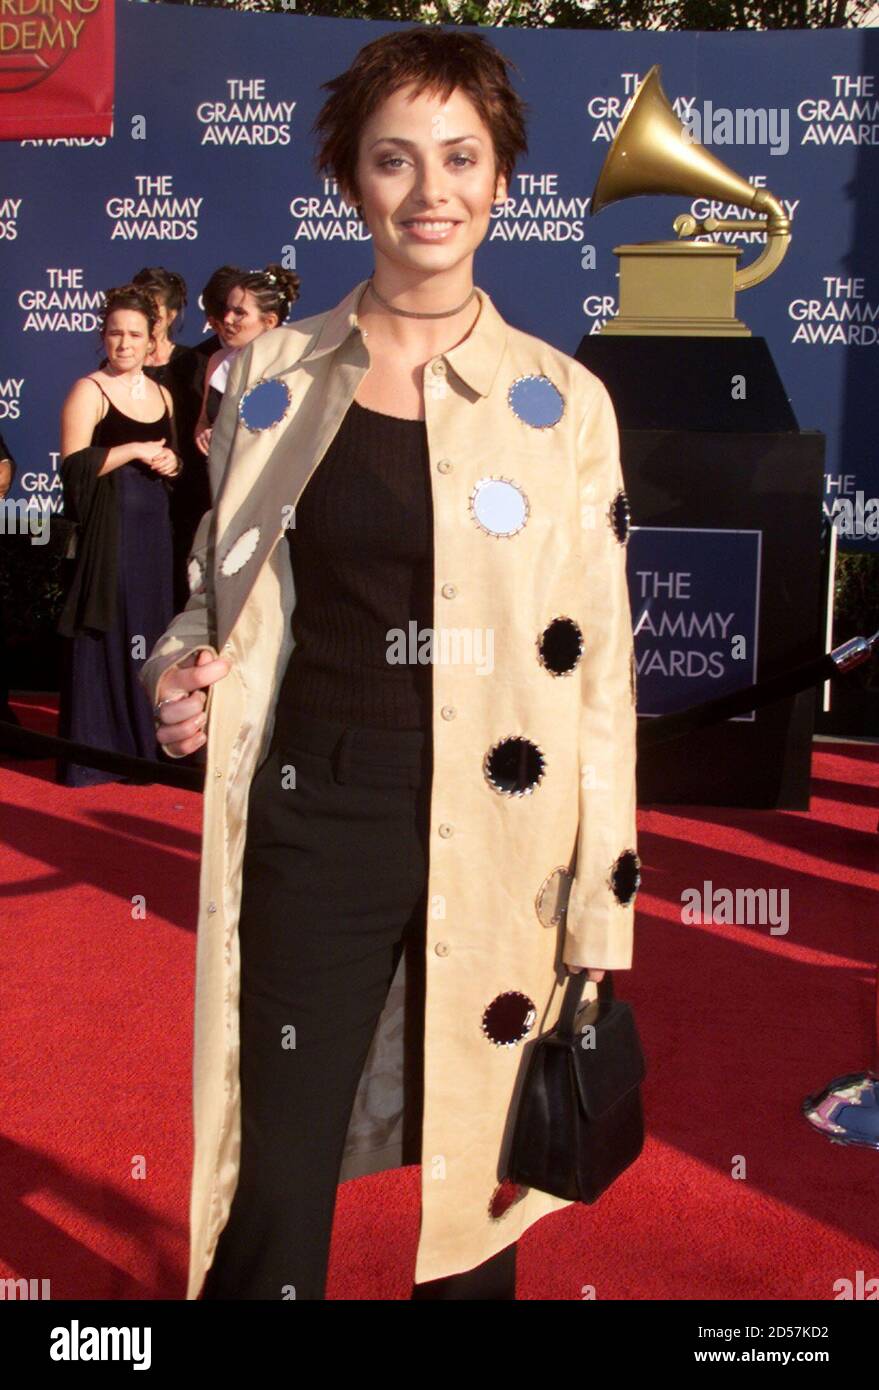 singer Natalie Imbruglia arrives at the Shrine Auditorium February 24 for the 1999 Grammy Awards in Los Angeles. Imburglia is nominated for Best New Artist, Best Pop Album for "